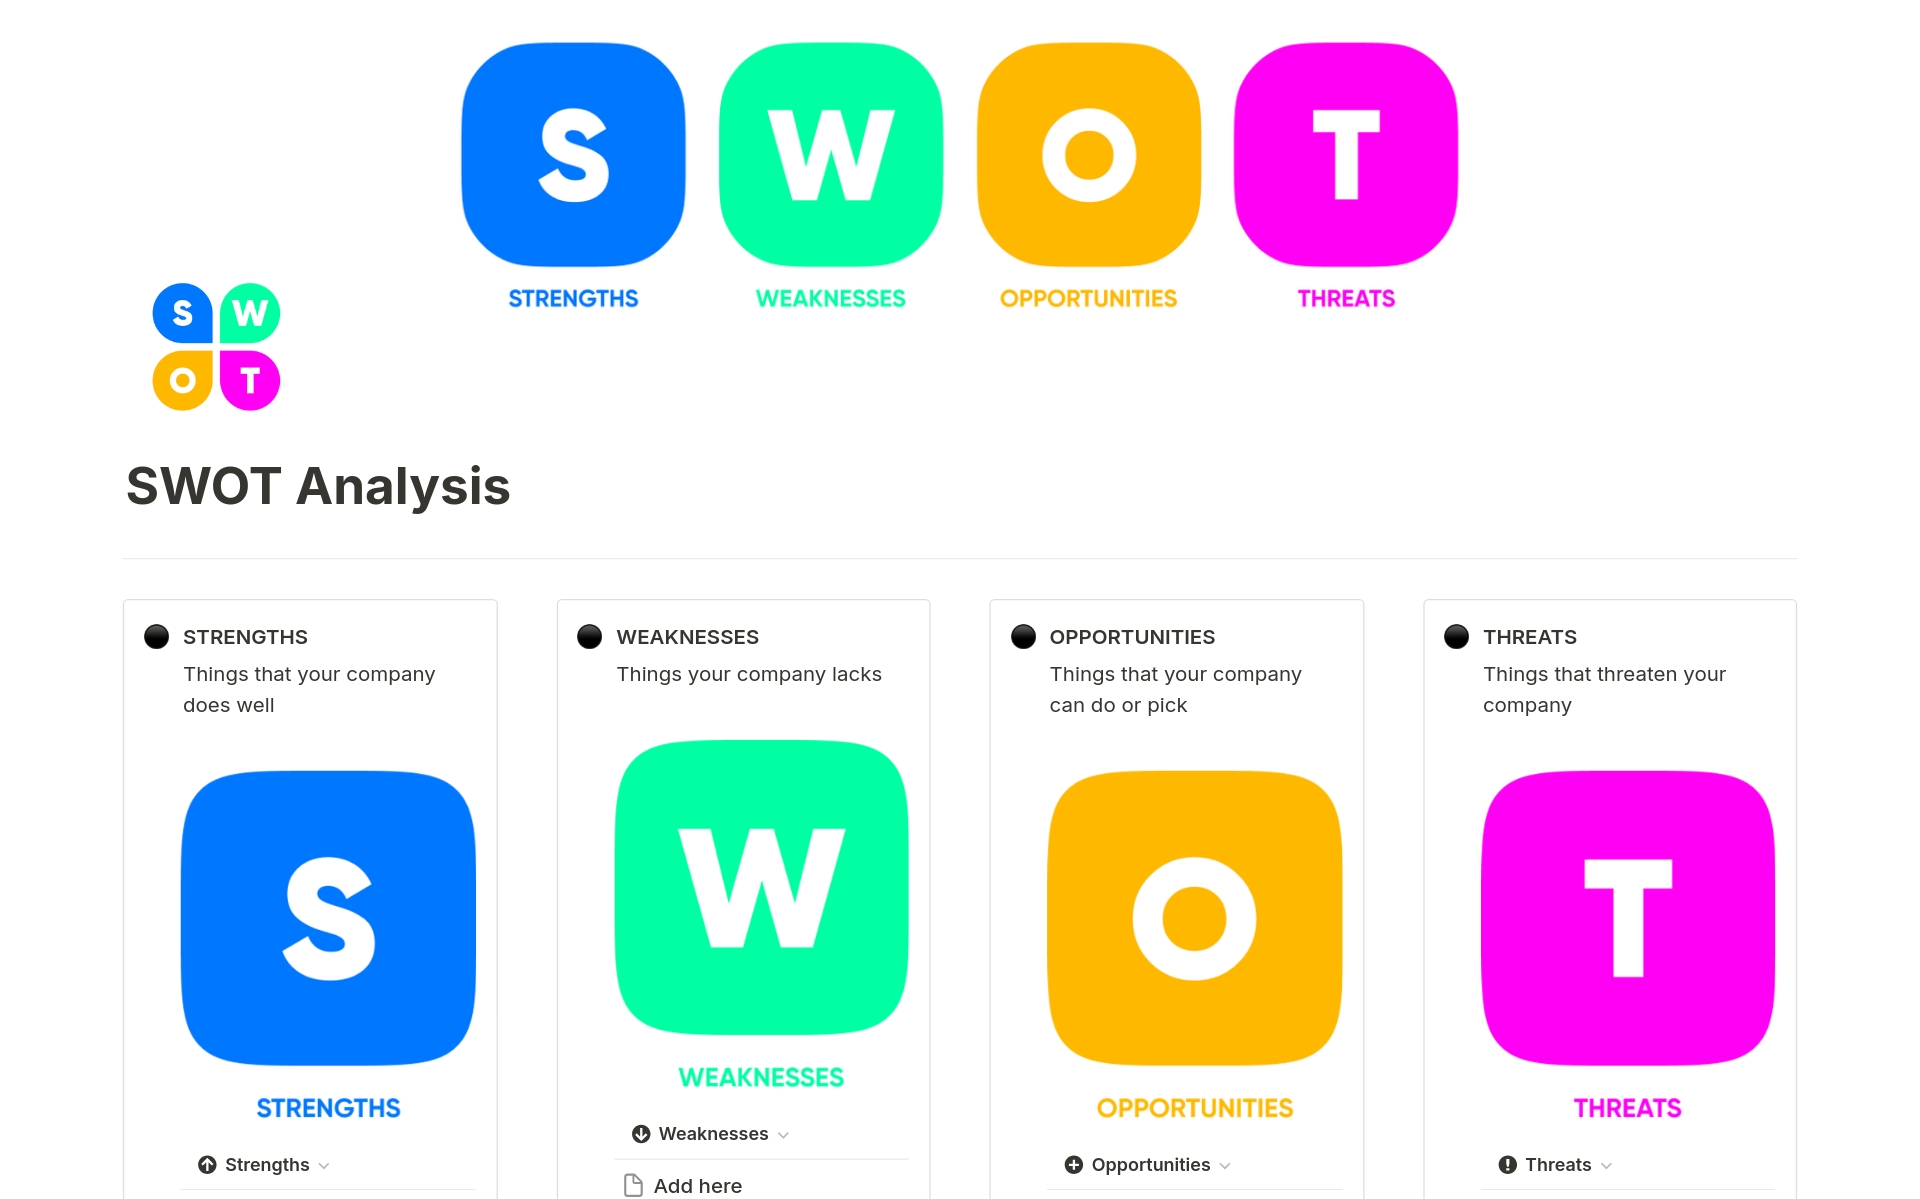 A SWOT analysis is designed for strategic thinking: It’s to help you understand where your business is and where you need to go next.